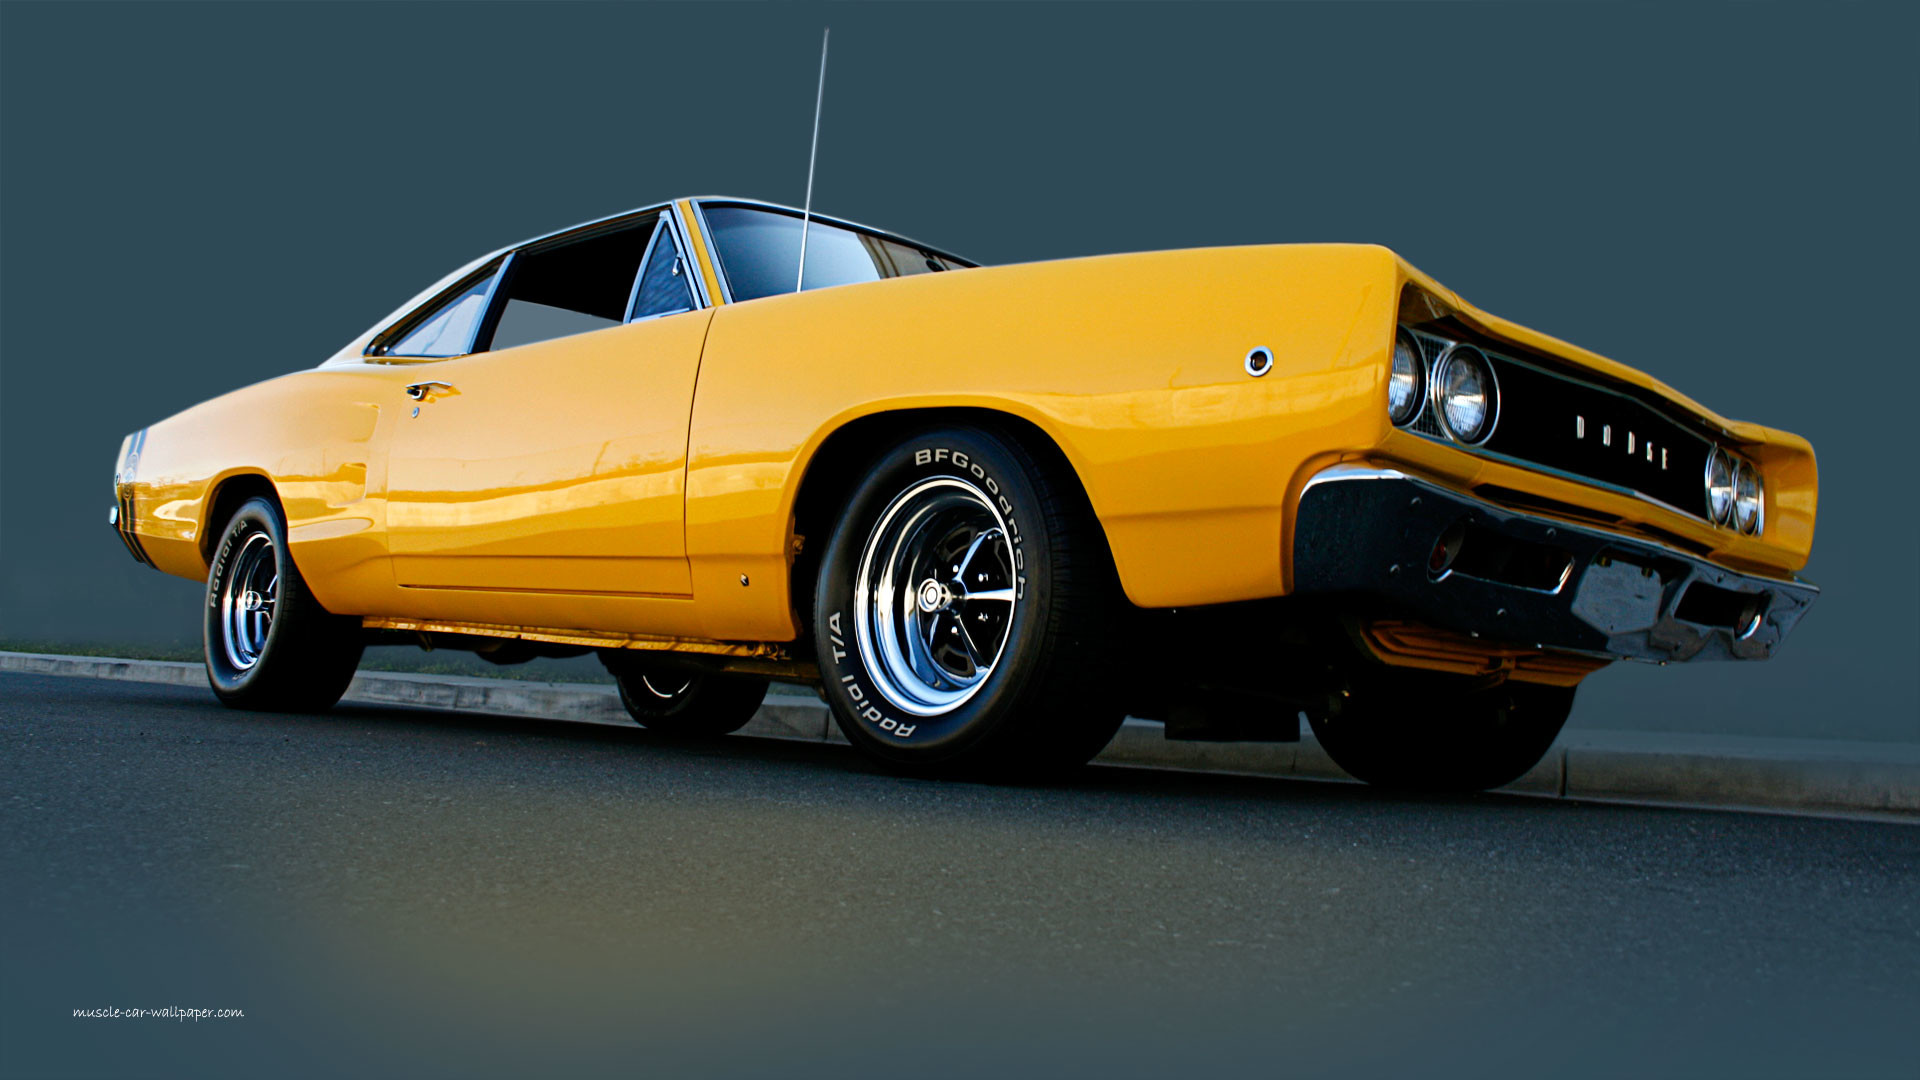 Close up,American closeup american yellow vintage old cars muscle cars usa air old cars vintage cars american cars Muscle cars Wallpaper Desktop